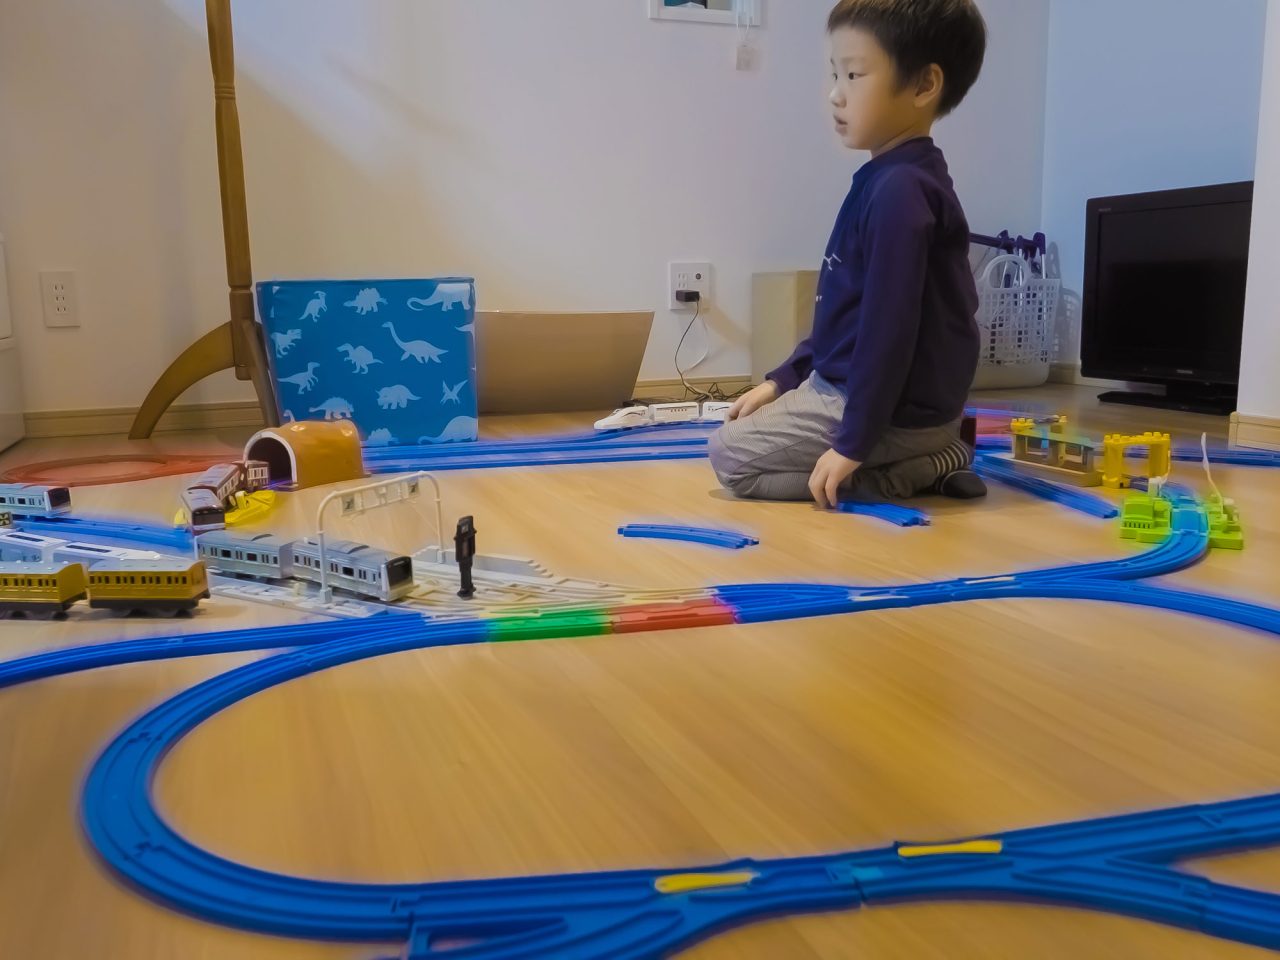 Small child sitting on parquet floor playing with a large train track.